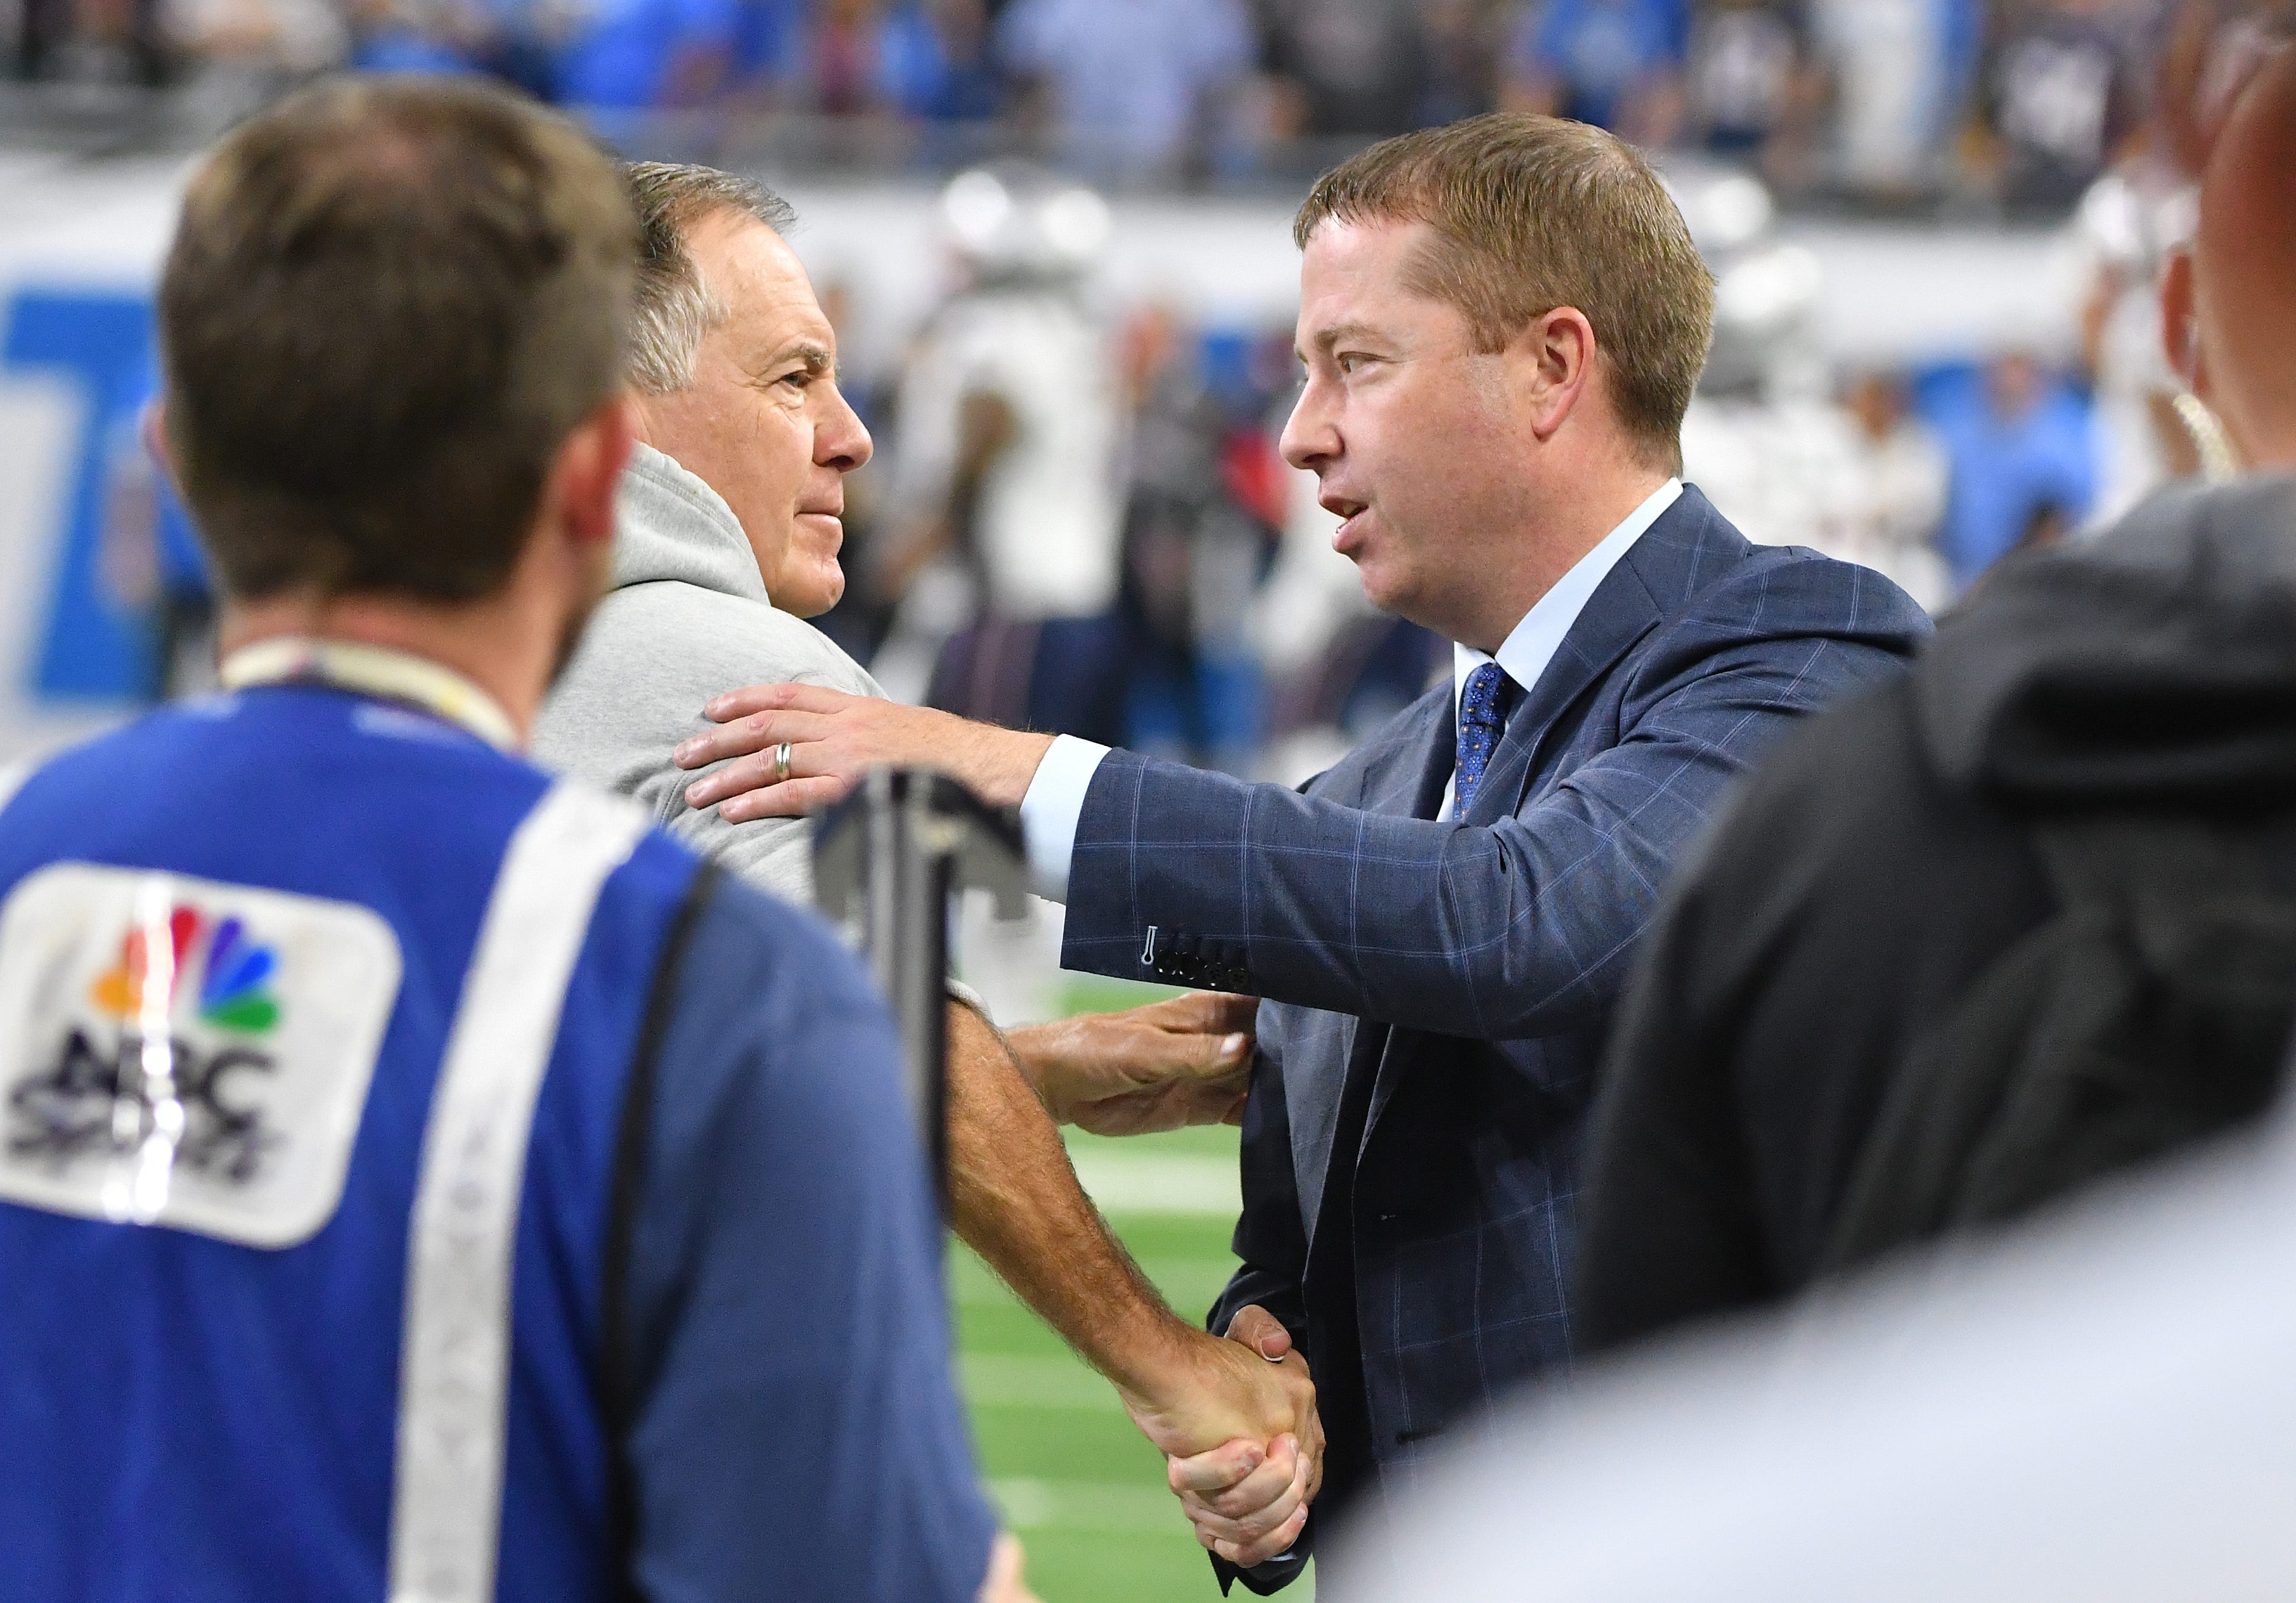 Patriots head coach Bill Belichick shakes hands with Lions GM Bob Quinn during warm-ups.